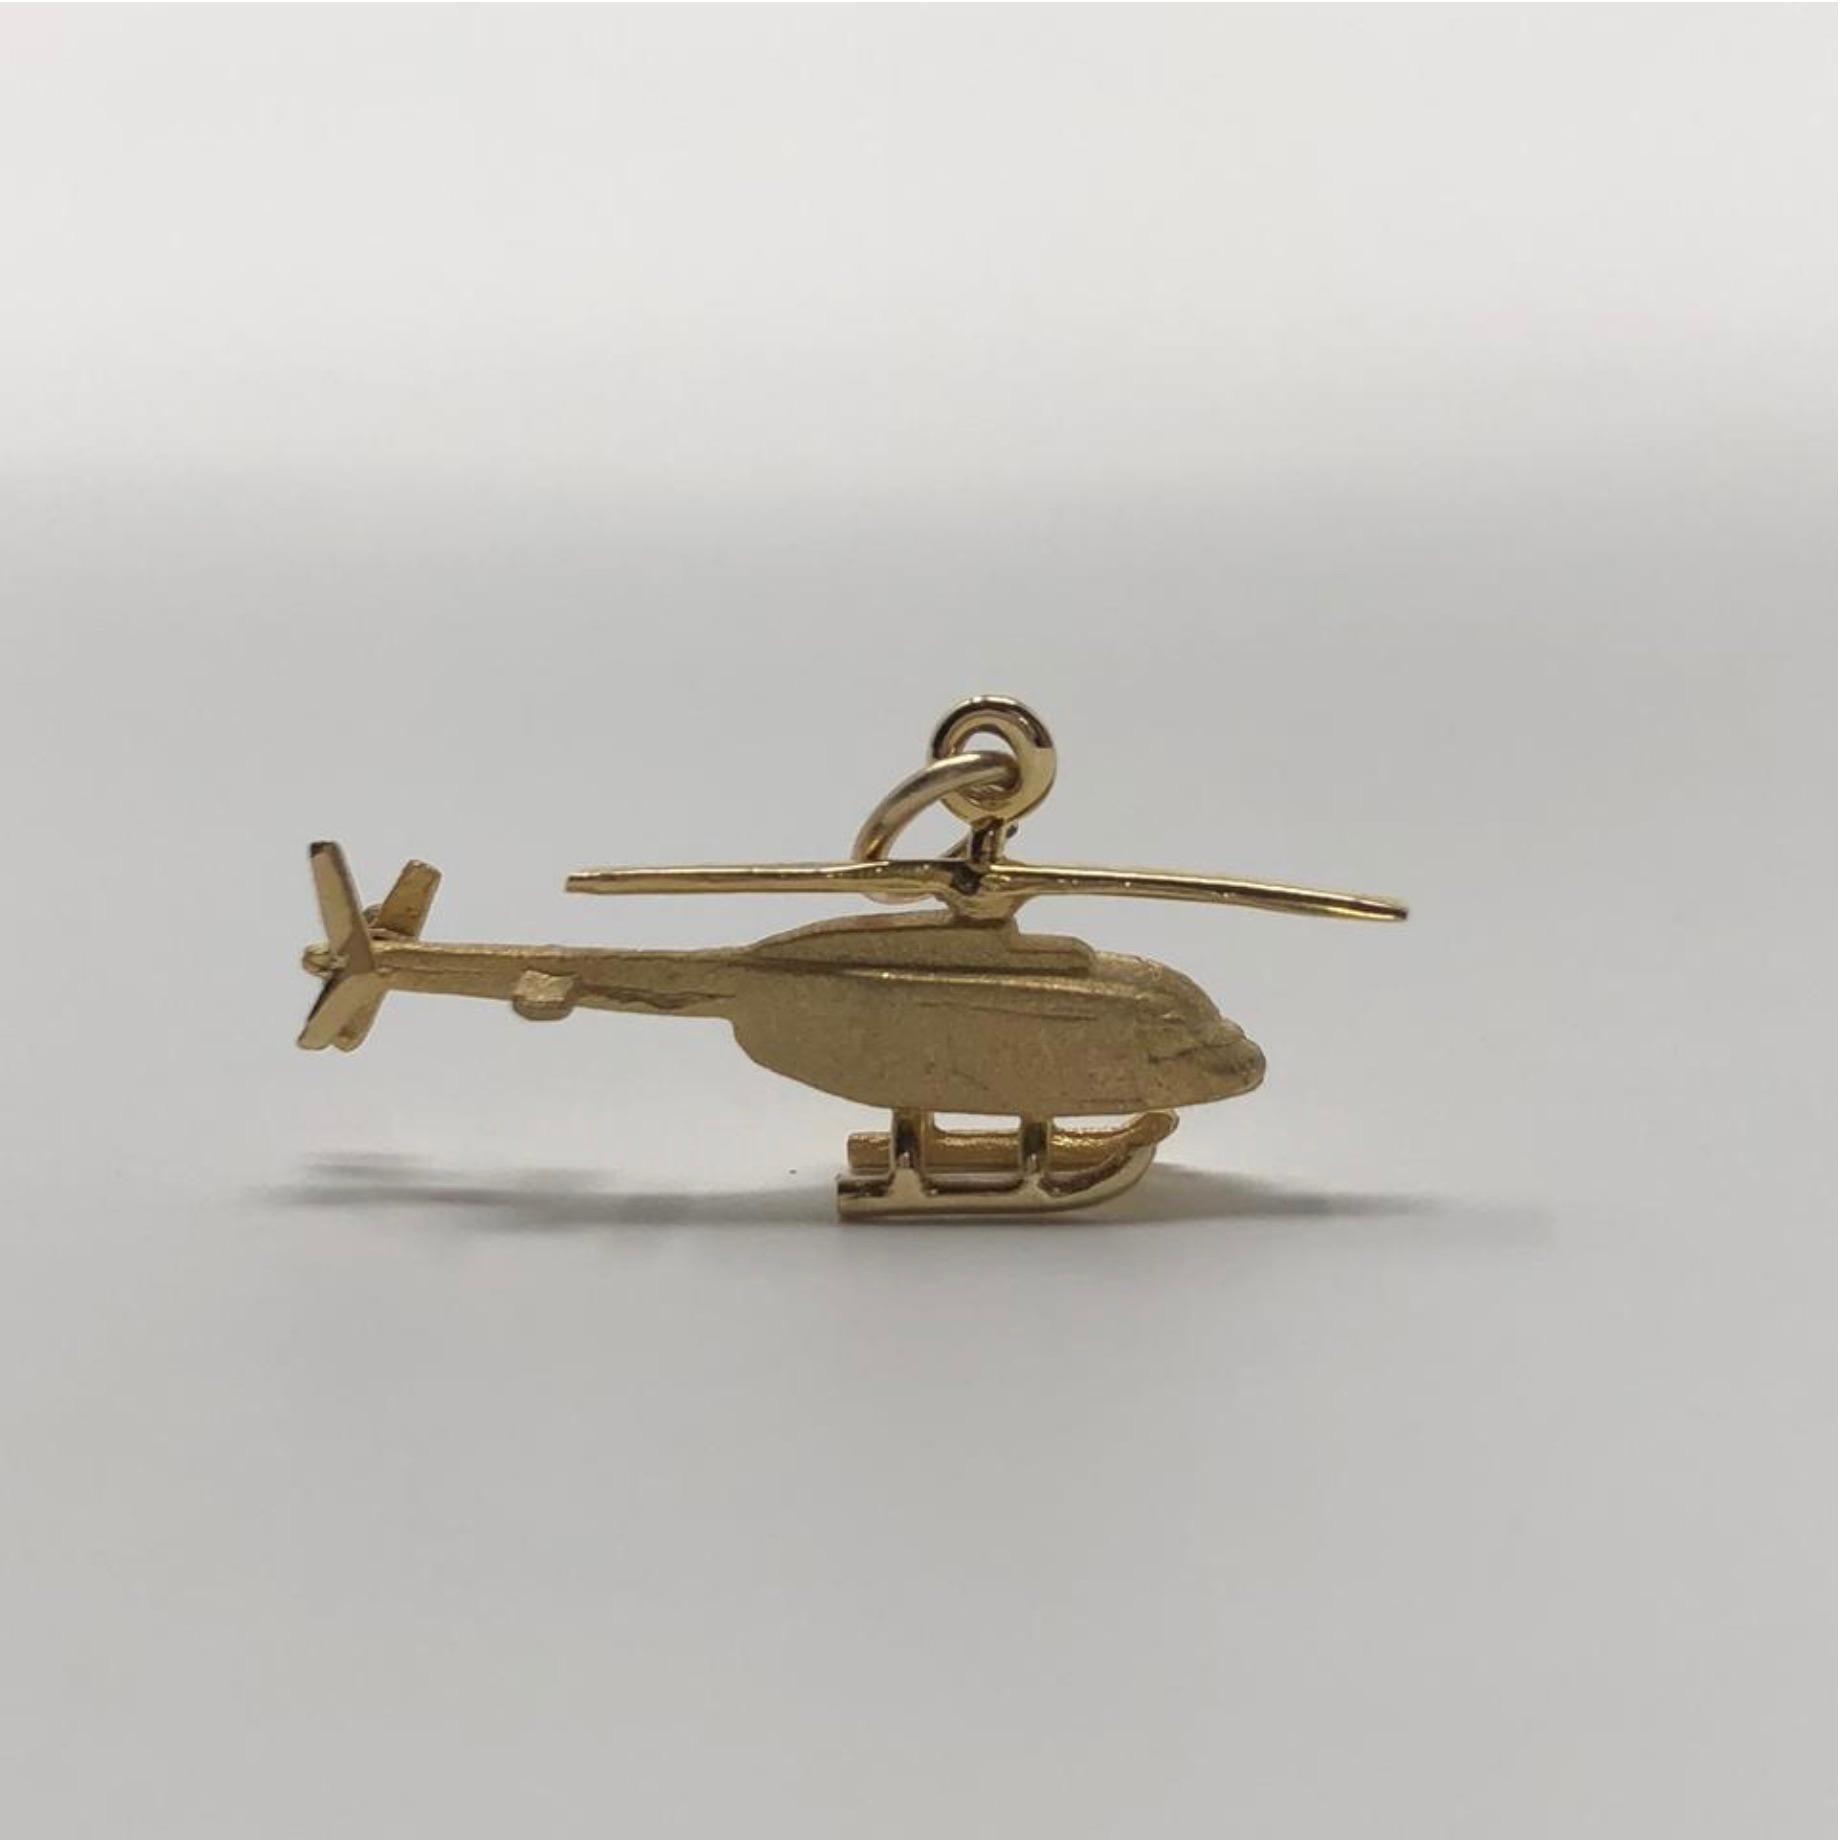 MODEL - Vintage 14k Gold Alaska Helicopter Pendent Charm

CONDITION - Exceptional! No signs of wear.

SKU - 2377-FL

ORIGINAL RETAIL PRICE - 175 + tax

MATERIAL - 14k Gold

WEIGHT - 1.75 grams

DIMENSIONS - L.9x H.4 (.5 with bail) x D.2

COMES WITH